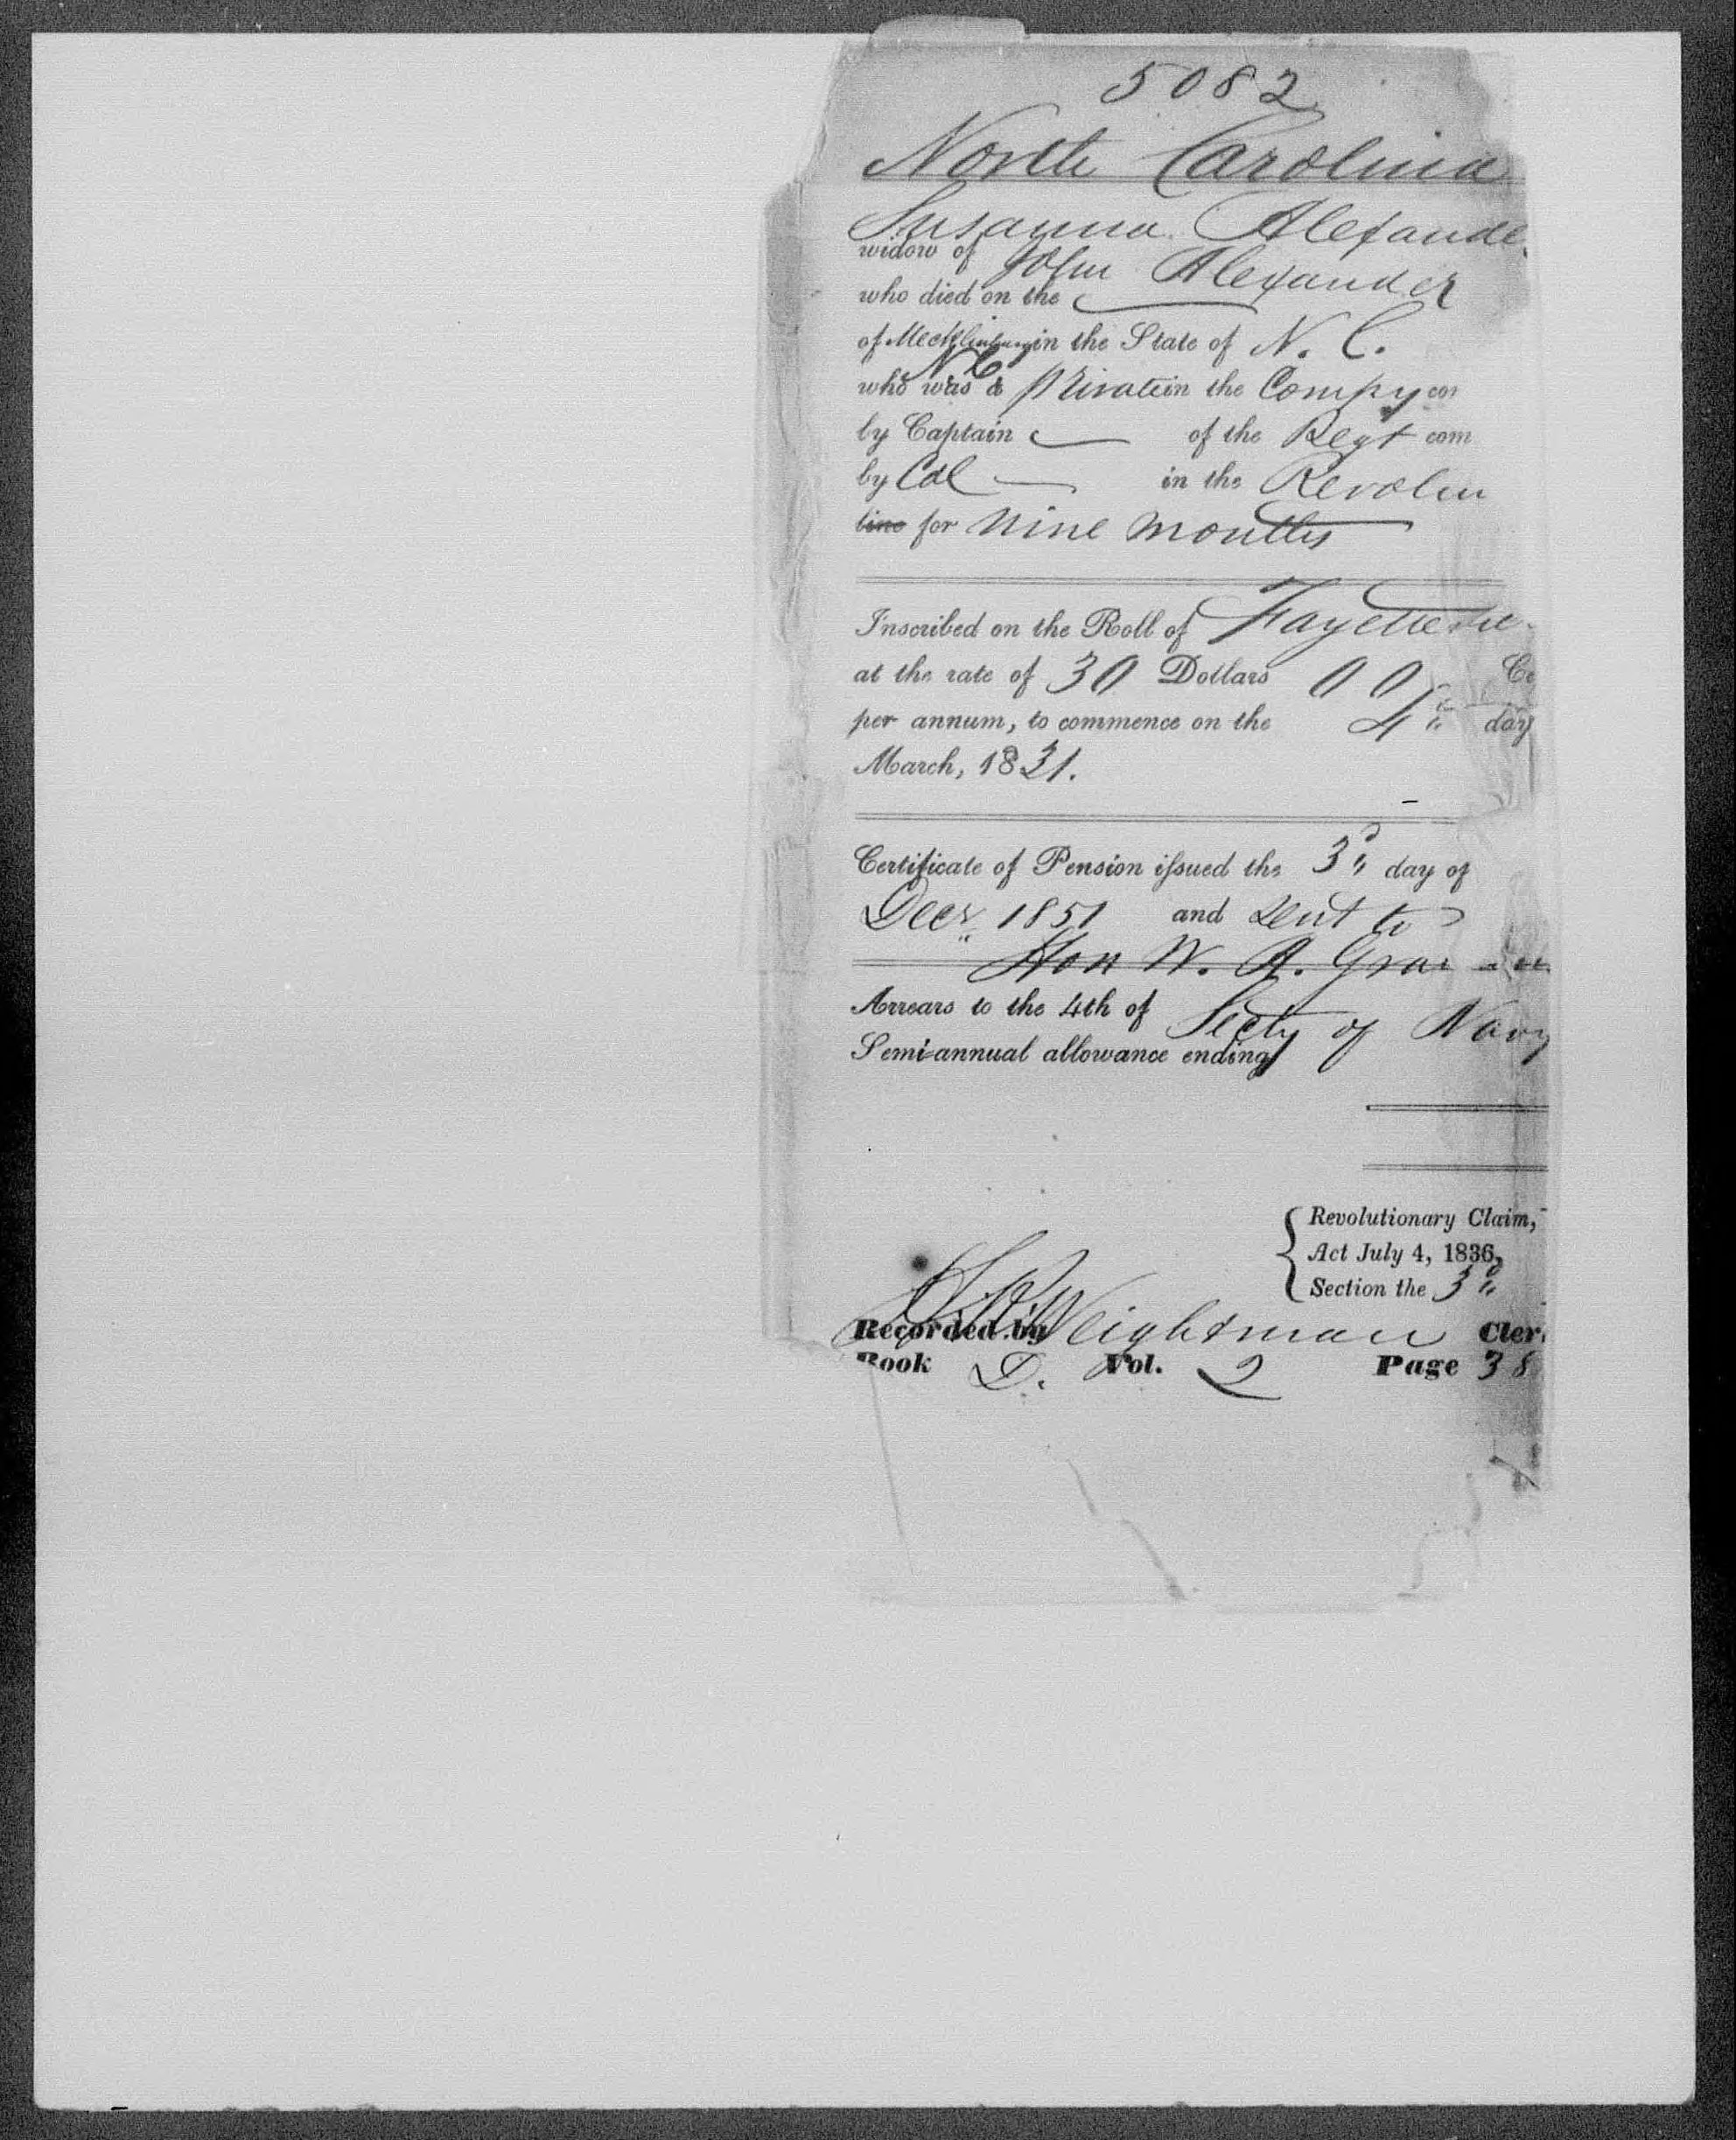 Docket for Pension from the U.S. Pension Office for Susana Alexander, 1 December 1851, page 1